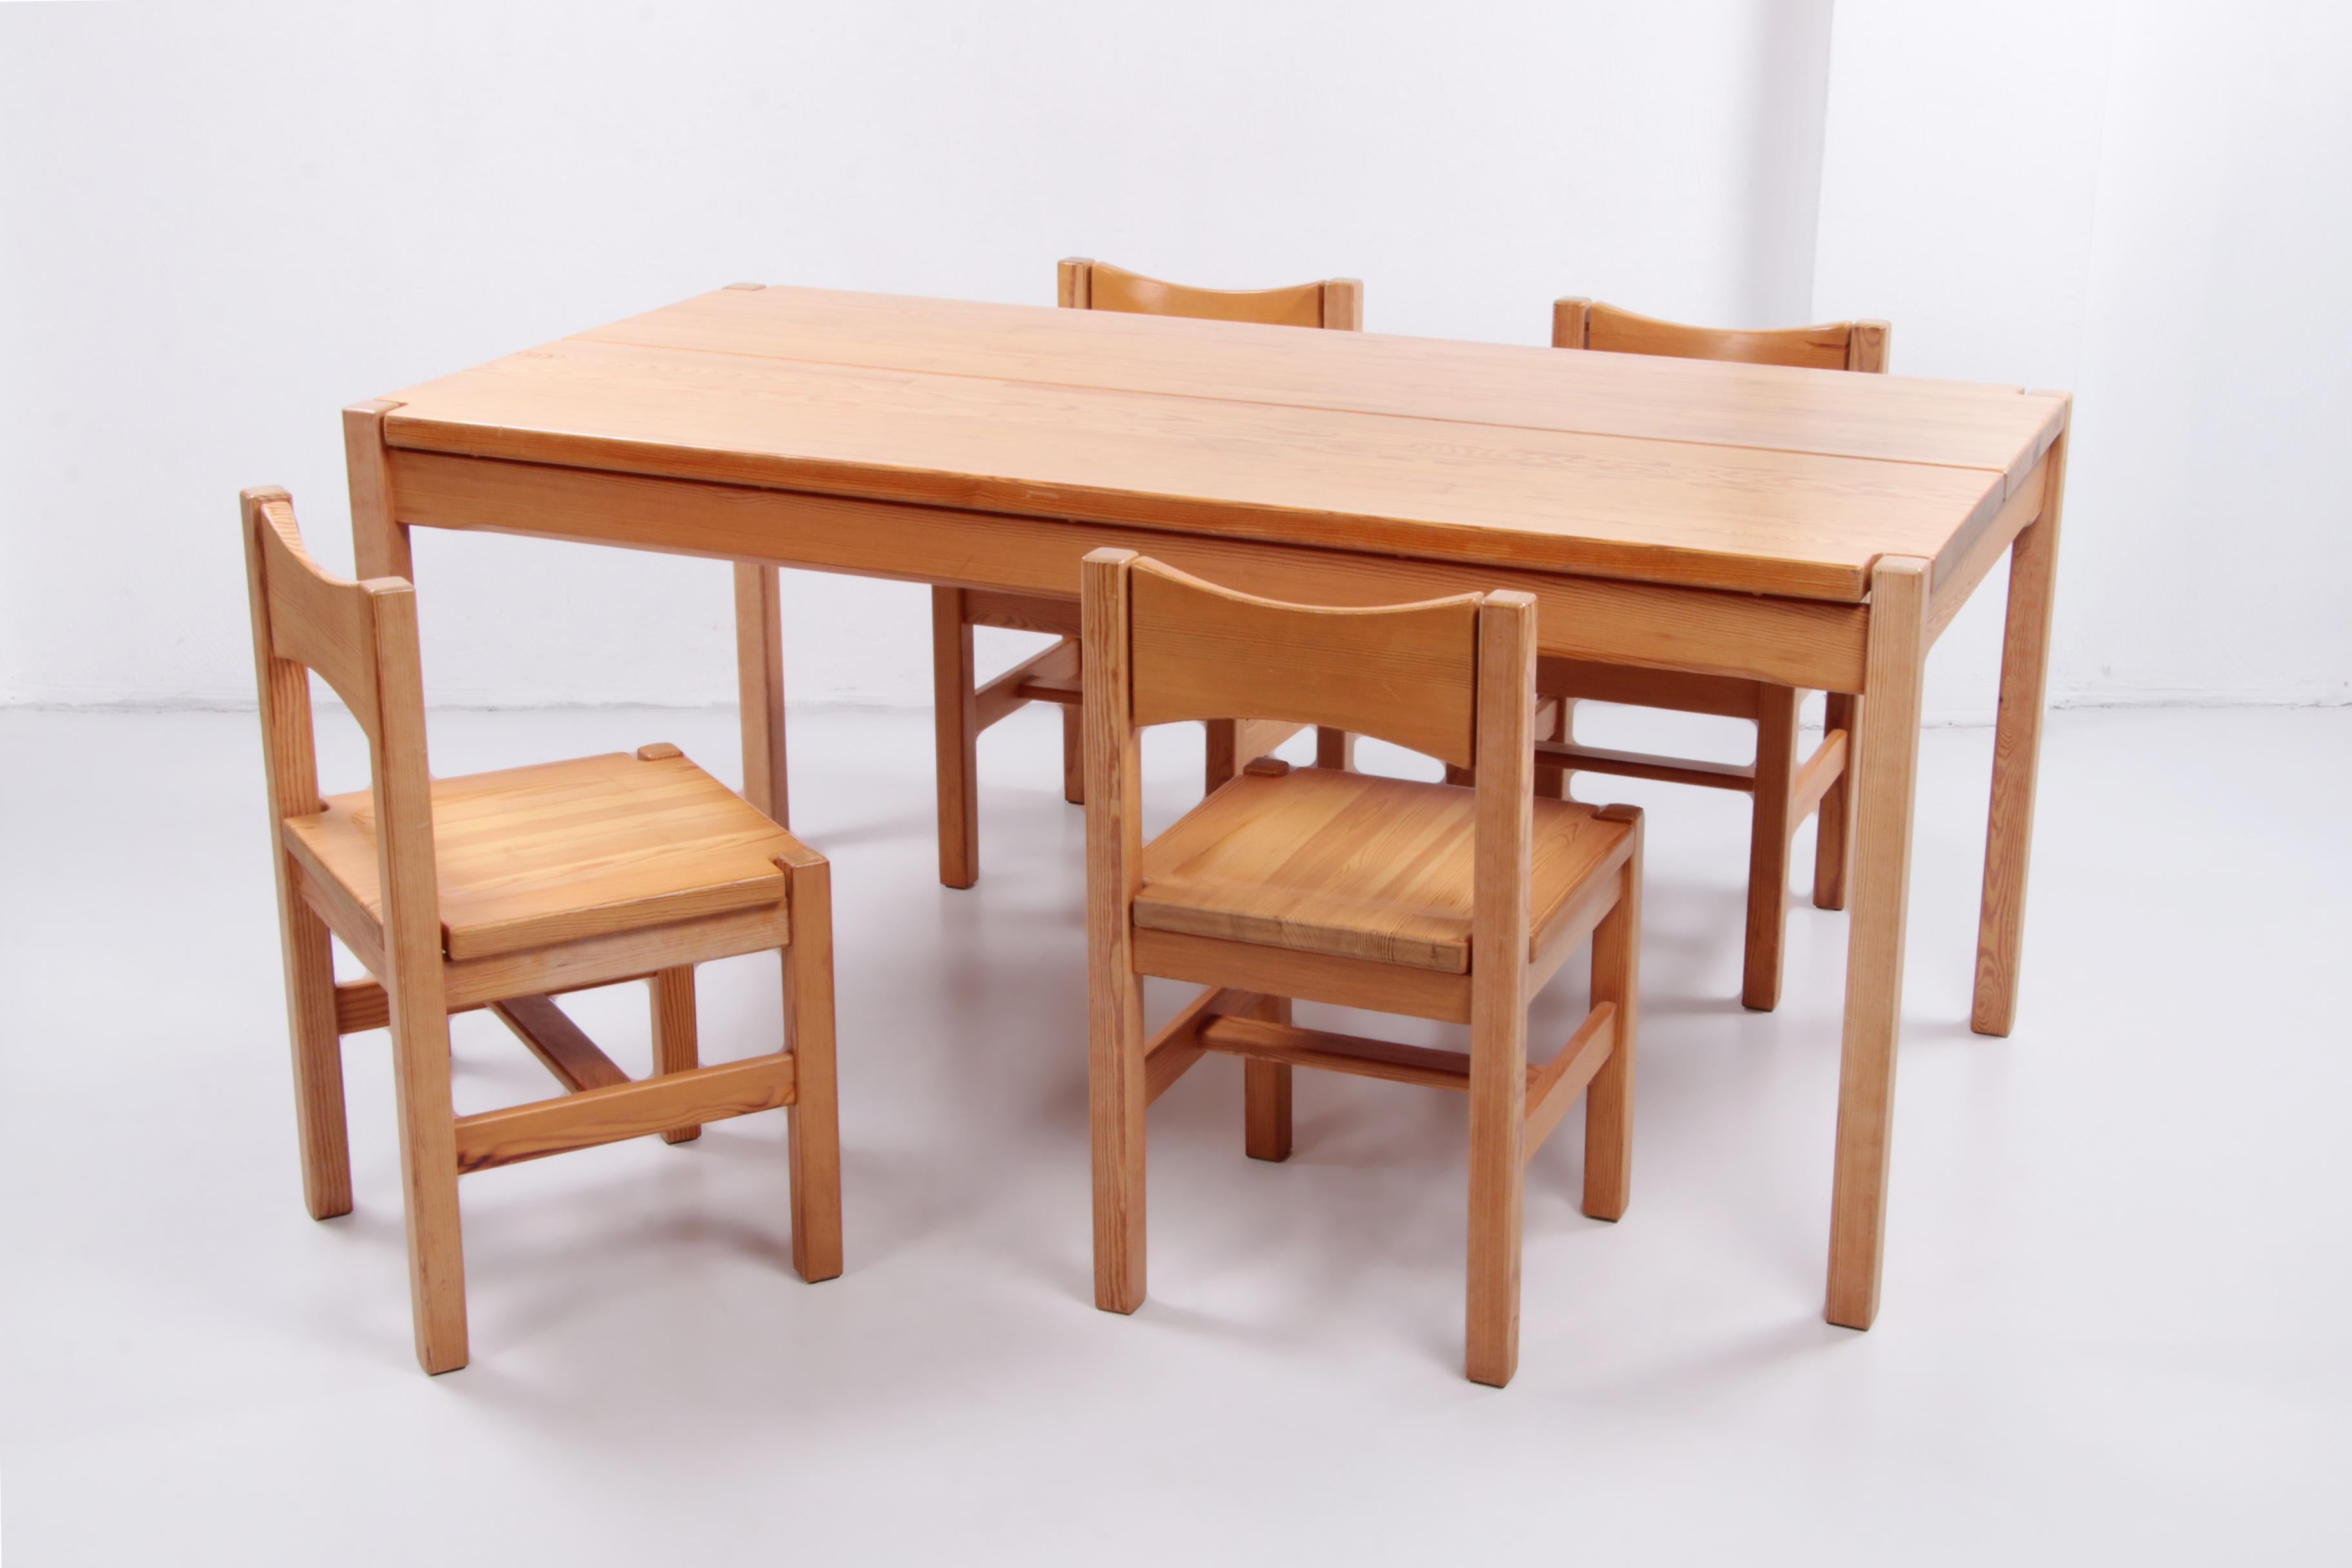 Finnish Ilmari Tapiovaara Dining Table with 4 Chairs for Laukaan Pu, 1963 For Sale